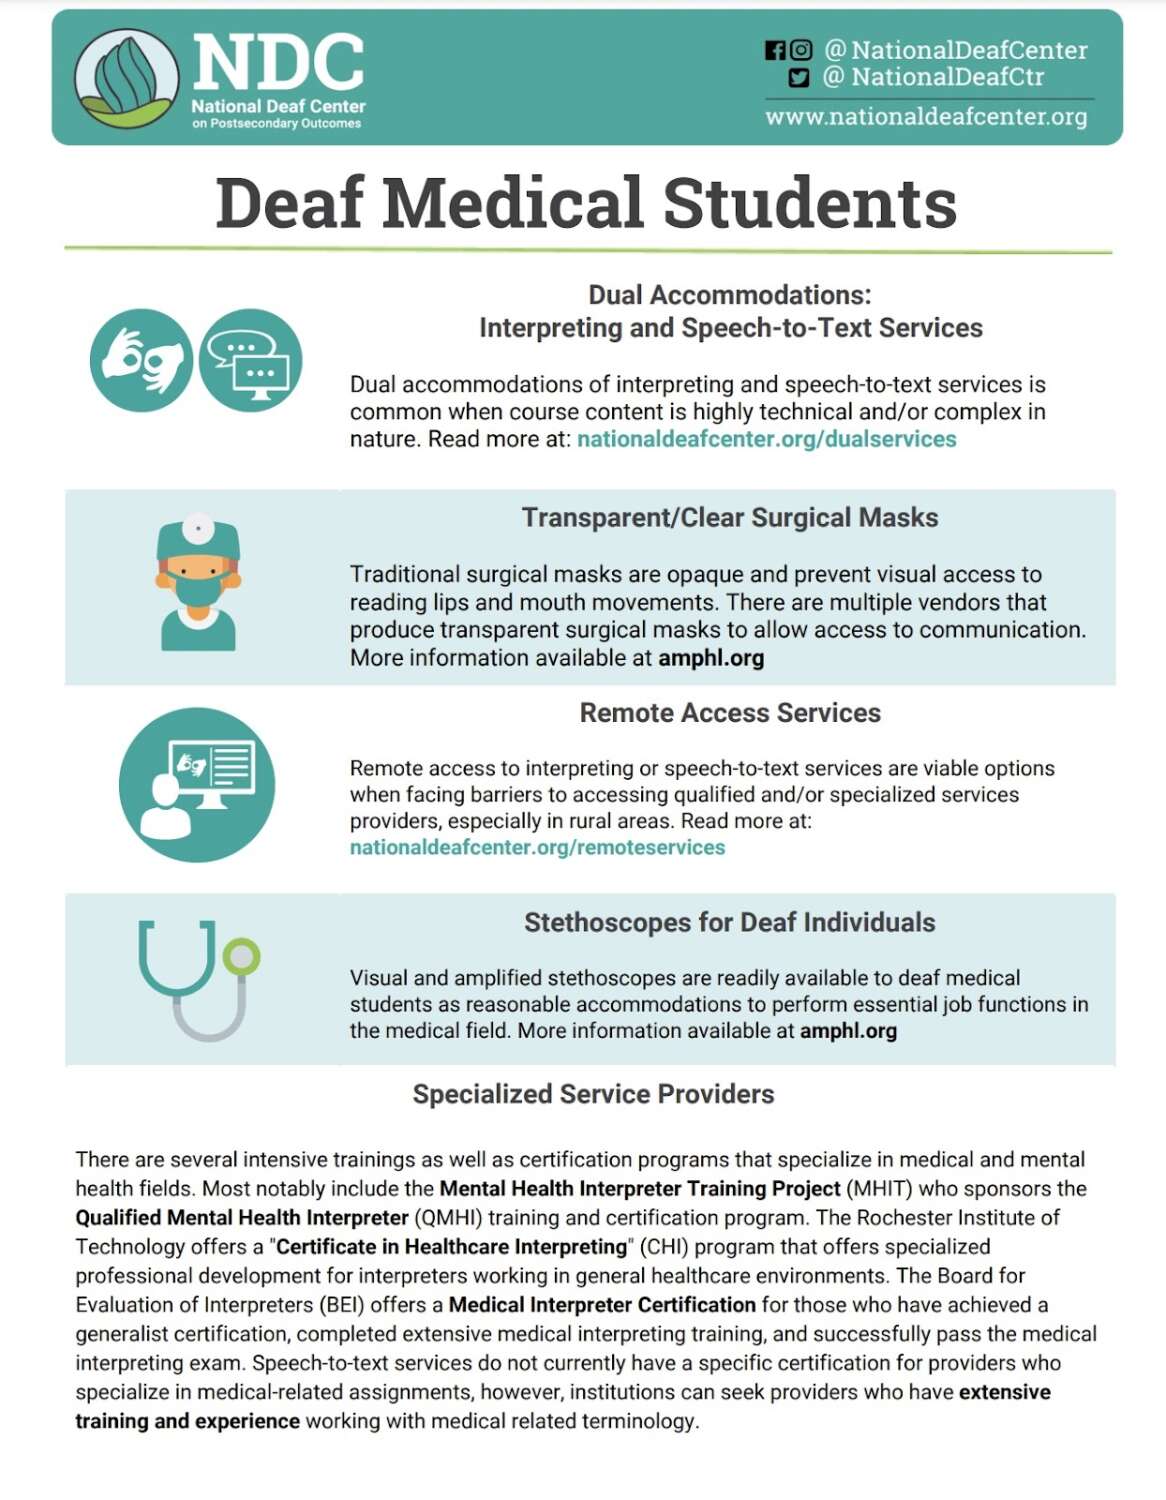 The image is a screenshot of text containing information about accommodations and services for deaf individuals in medical settings. It includes details about dual accommodations, transparent surgical masks, remote access services, stethoscopes for deaf individuals, and specialized service providers for medical and mental health fields. The text also mentions specific programs and certifications available for interpreters and speech-to-text service providers in healthcare settings.